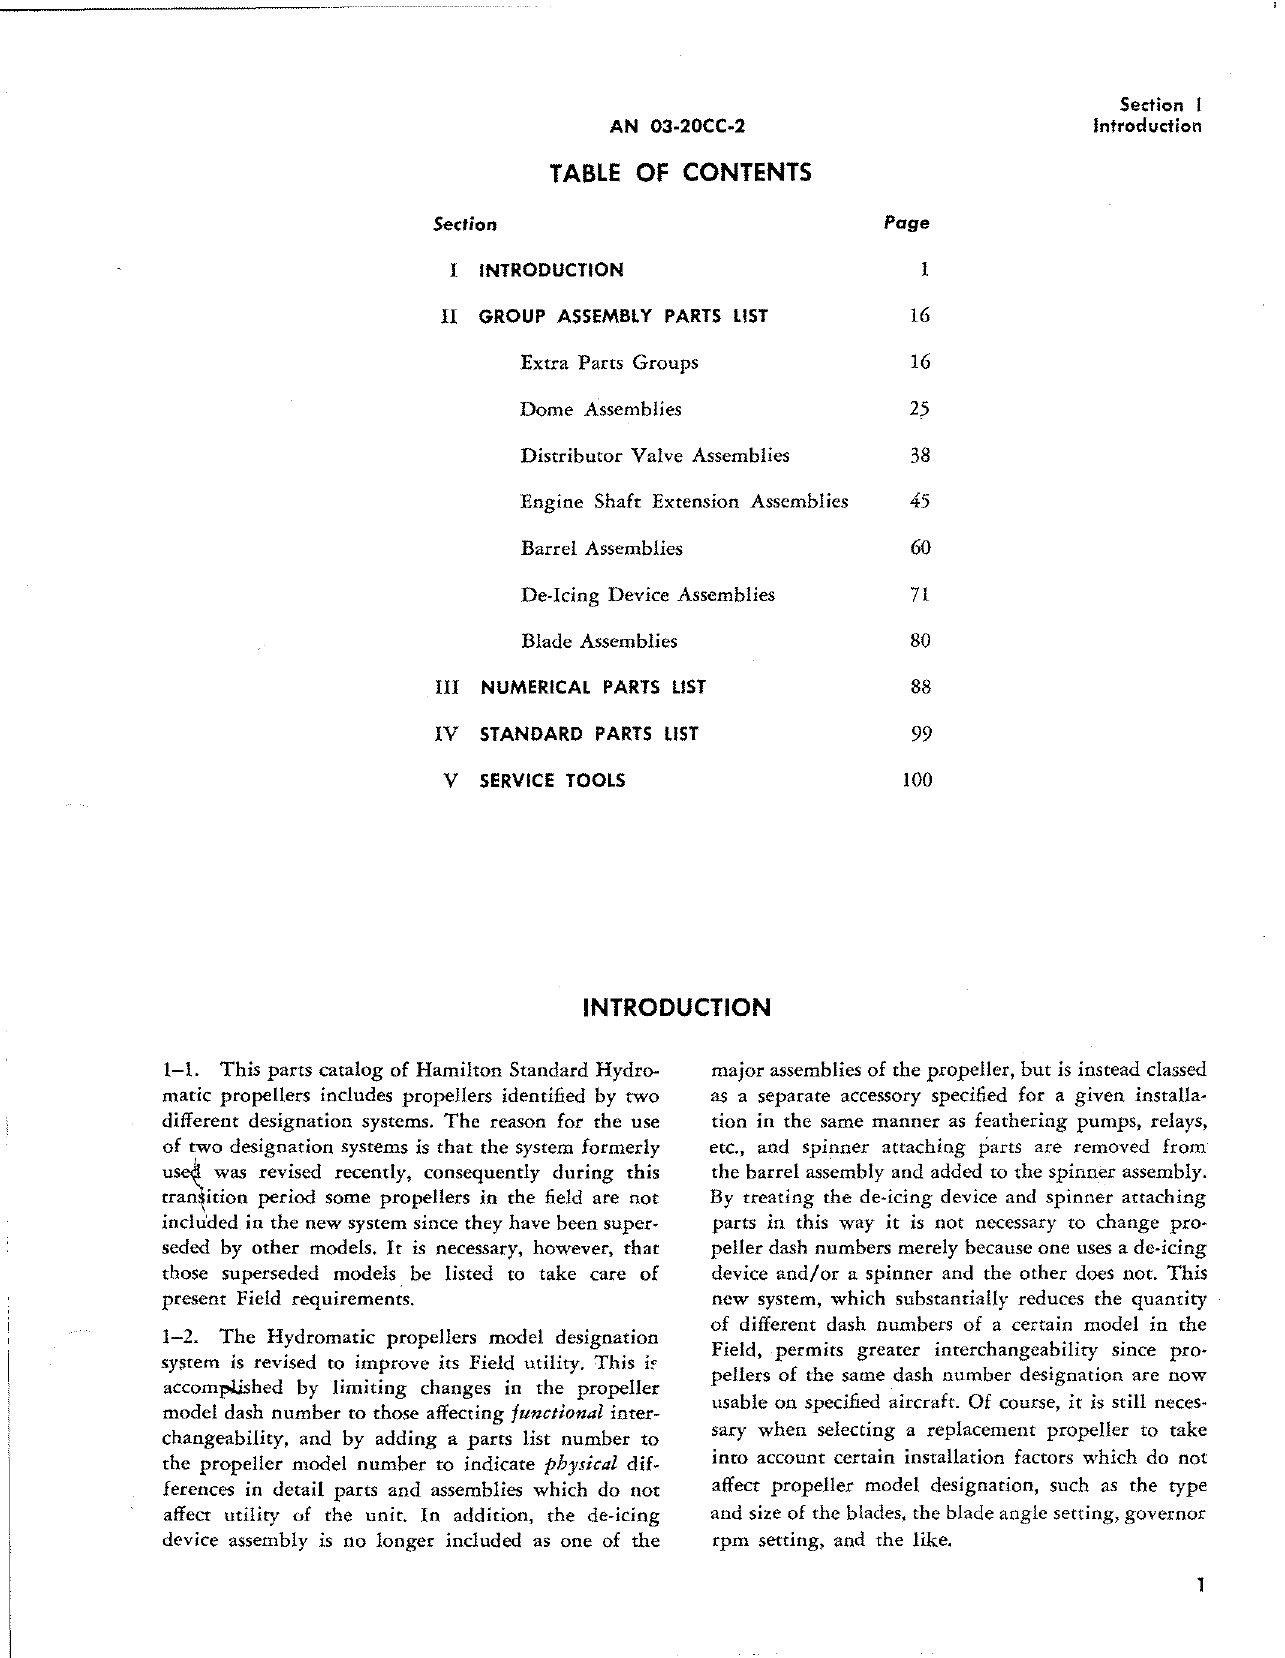 Sample page 3 from AirCorps Library document: Parts Catalog for Hydromatic Propellers